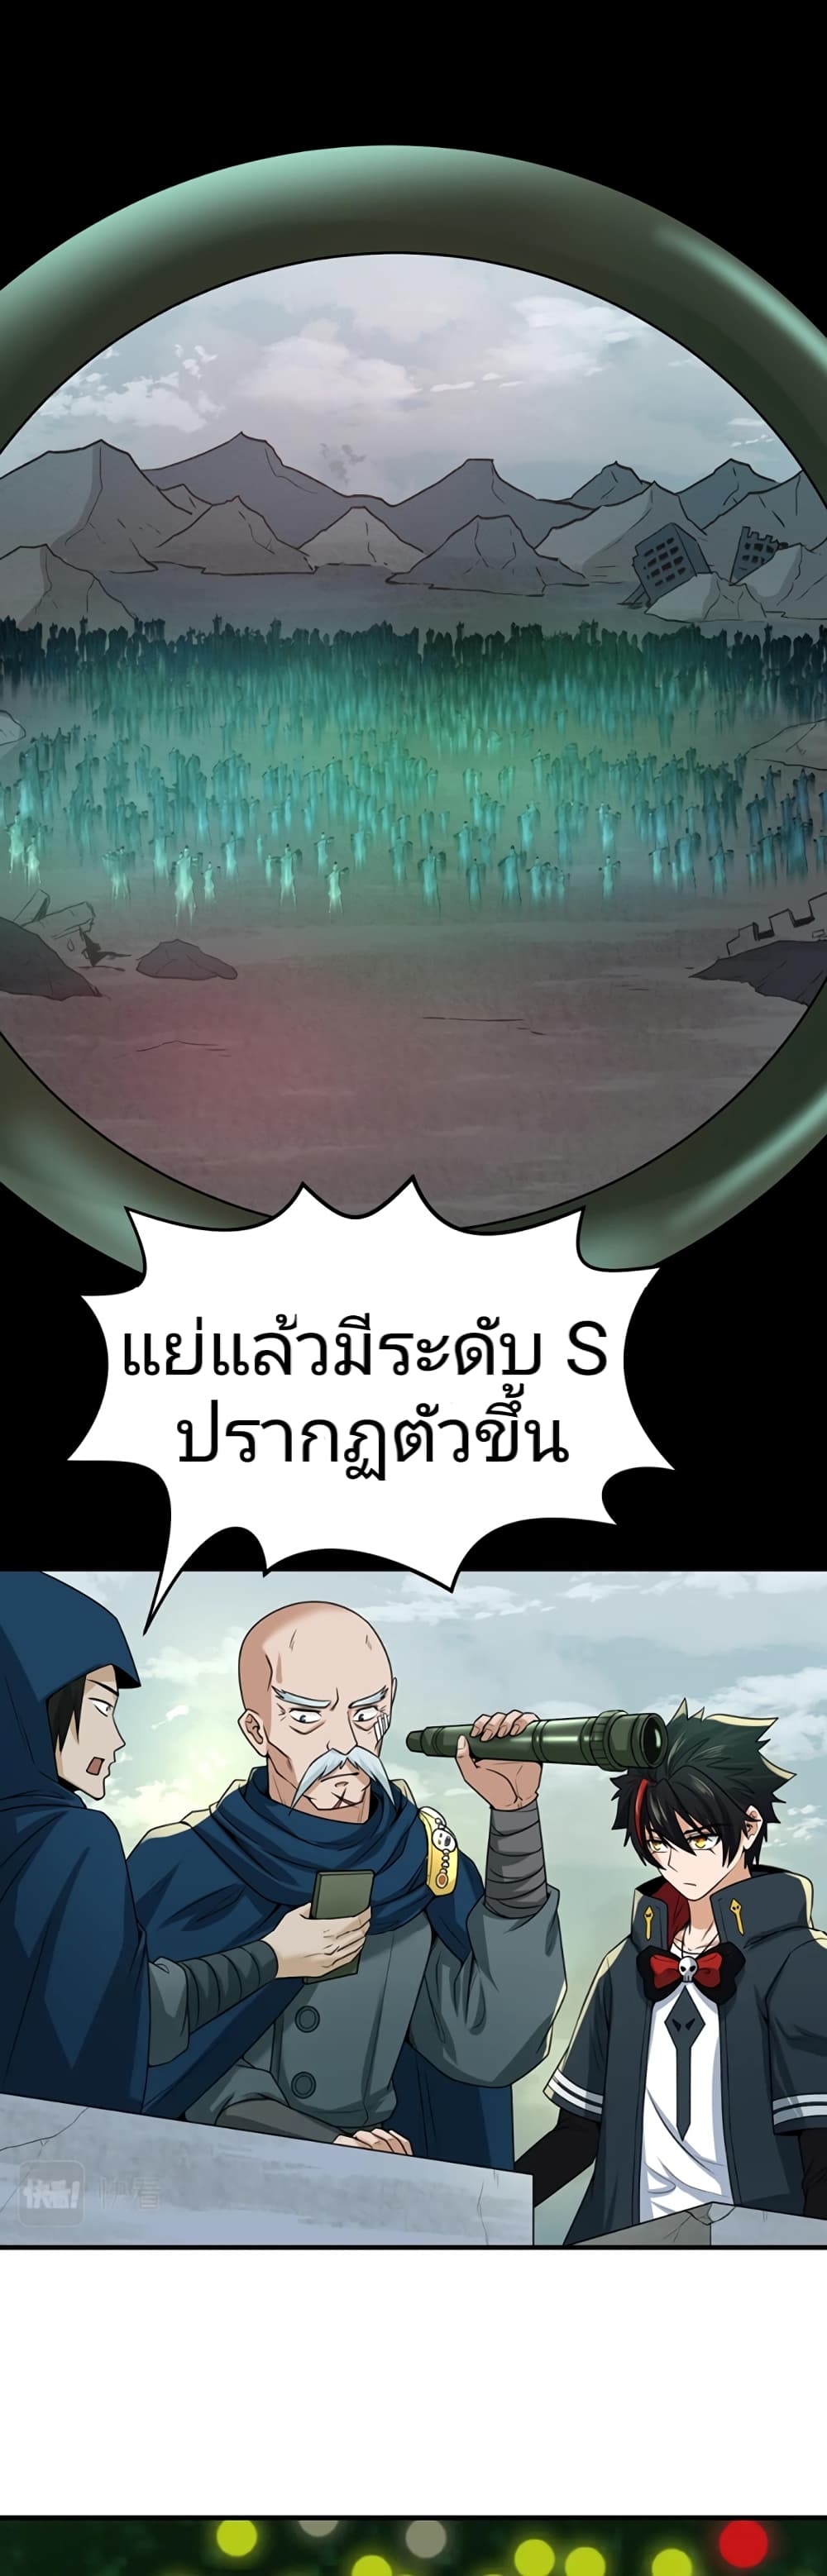 The Age of Ghost Spirits à¸à¸­à¸à¸à¸µà¹ 29 (23)